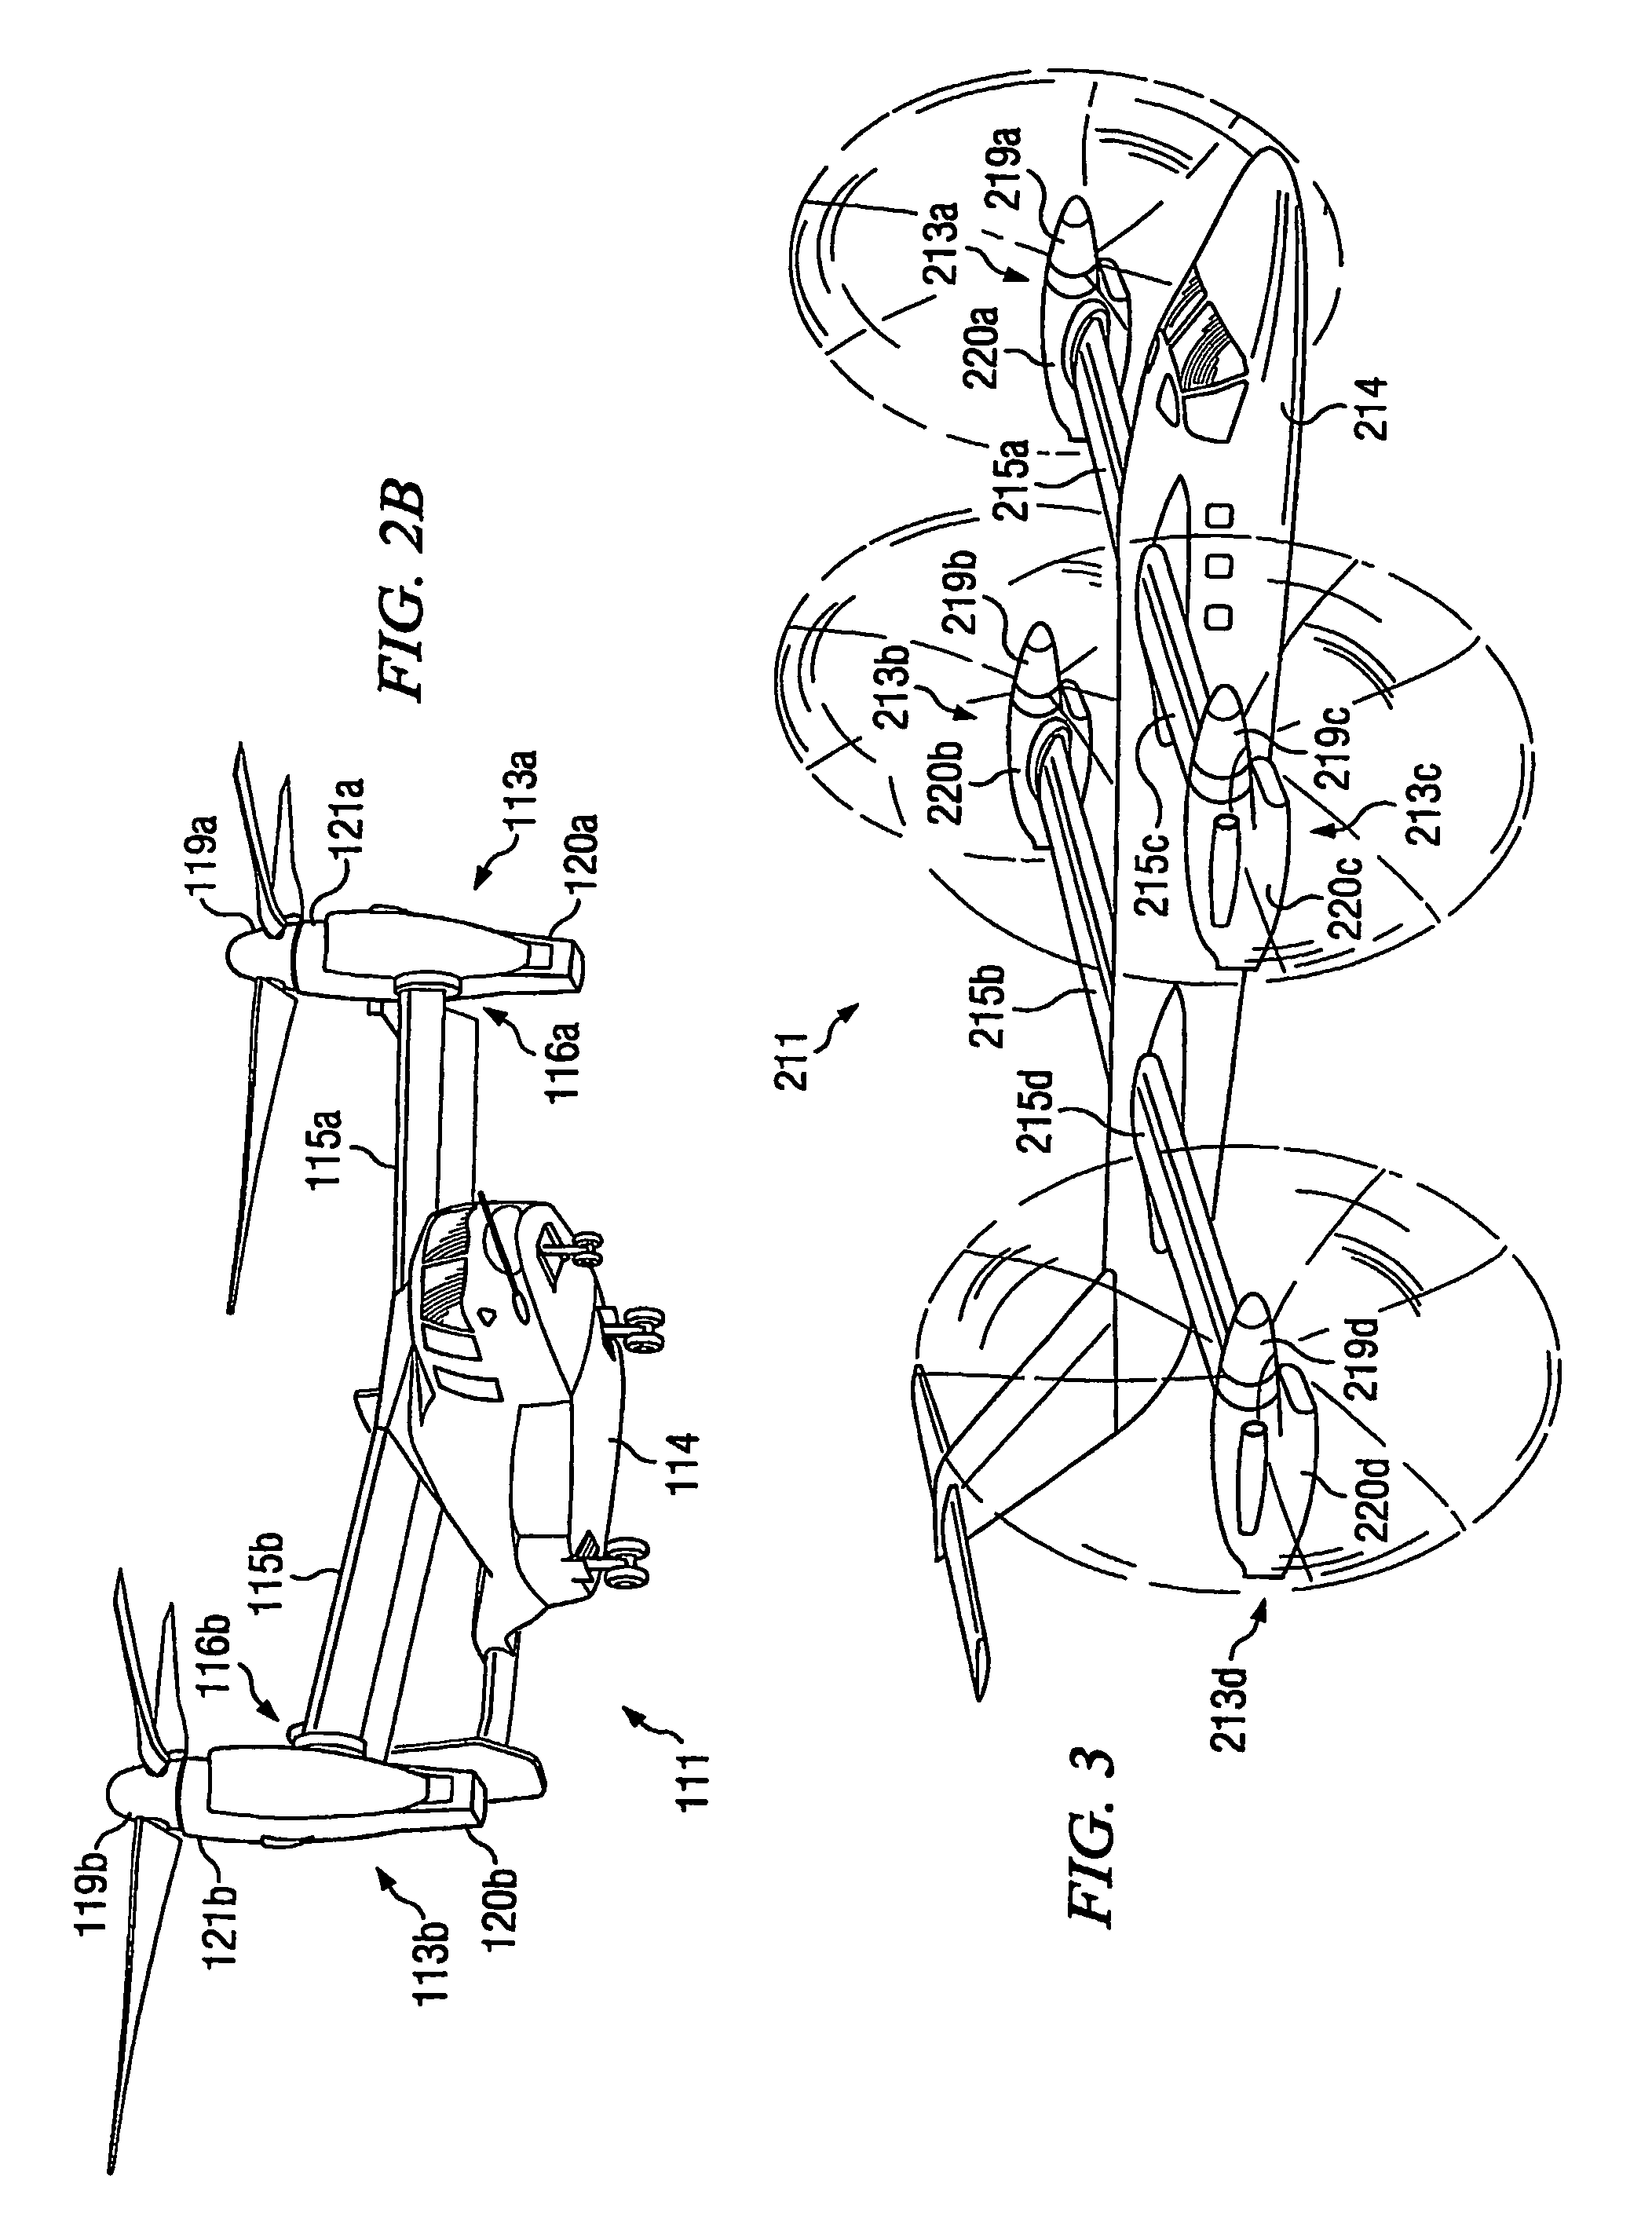 Composite drive shaft with captured end adapters